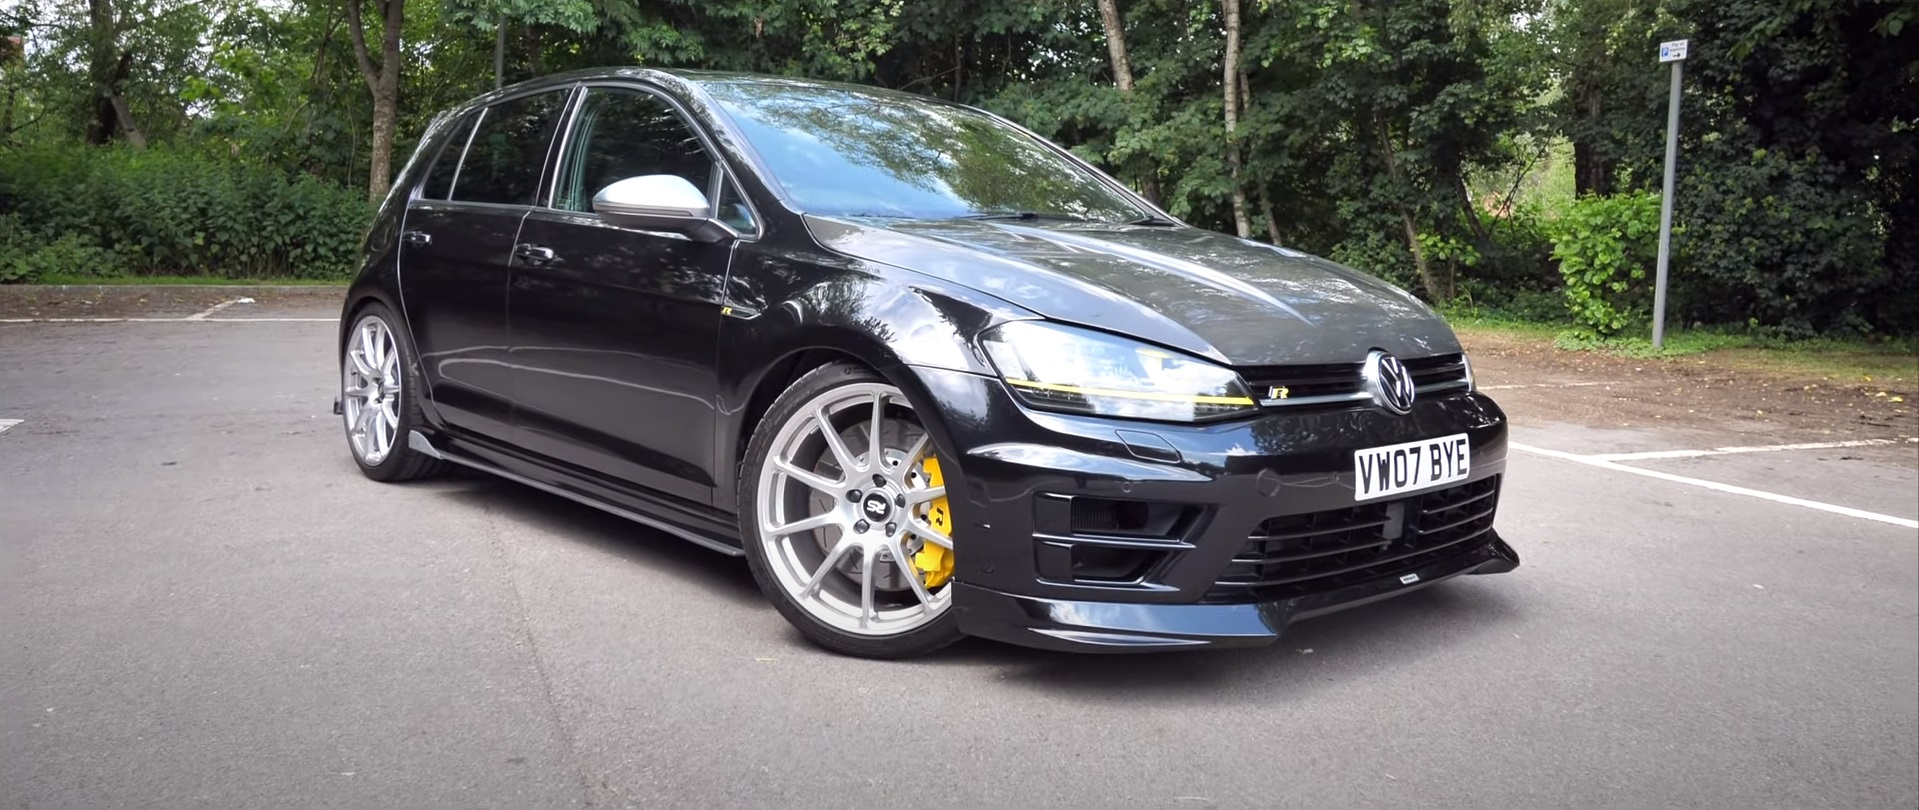 492HP VW GOLF R MK7 REVIEW on AUTOBAHN [NO SPEED LIMIT] by AutoTopNL 